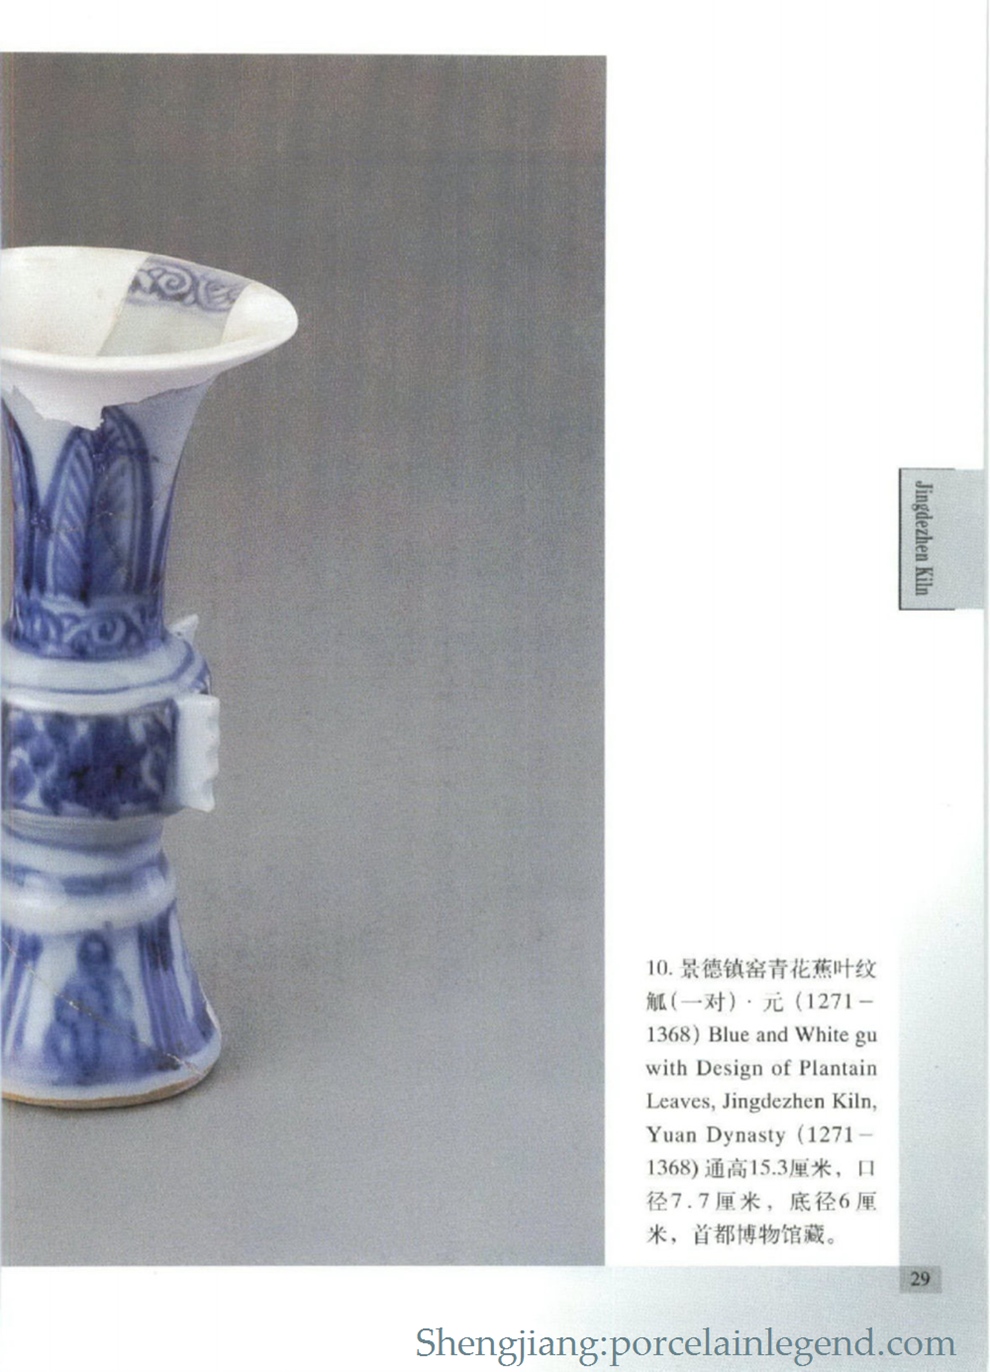 yuan (1271 - 1368) Blue and White gu with Design of PlantainLeaves, Jingdezhen Kiln, Yuan Dynasty (1271- 1368) Passing height 15.3 cm, caliber 7.7 cm, bottom diameter 6% M, the museum of the capital.